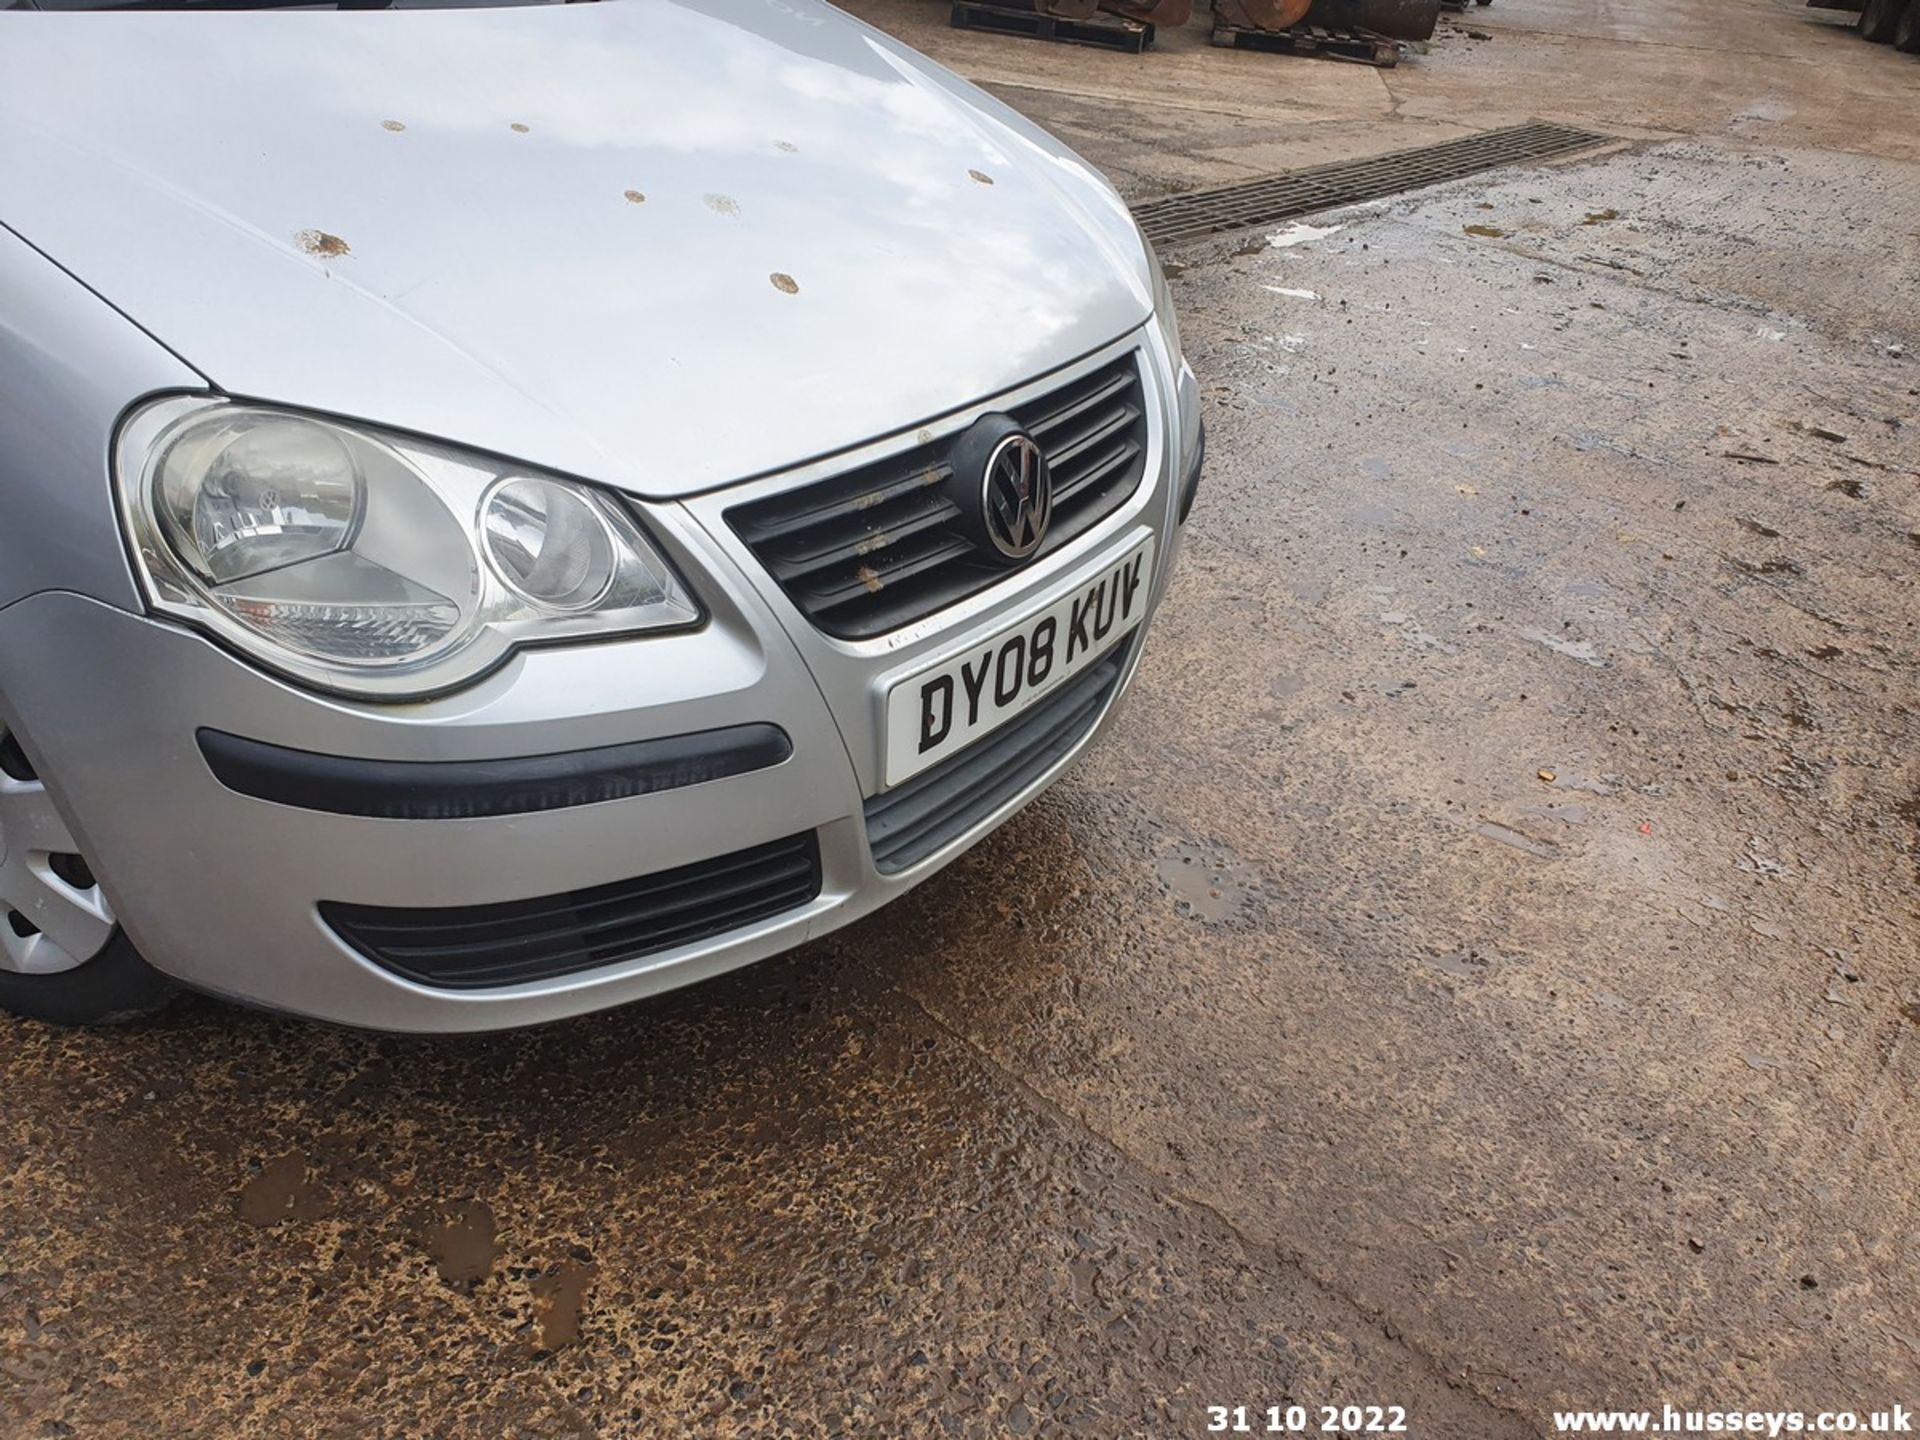 08/08 VOLKSWAGEN POLO E 60 - 1198cc 5dr Hatchback (Silver) - Image 11 of 24